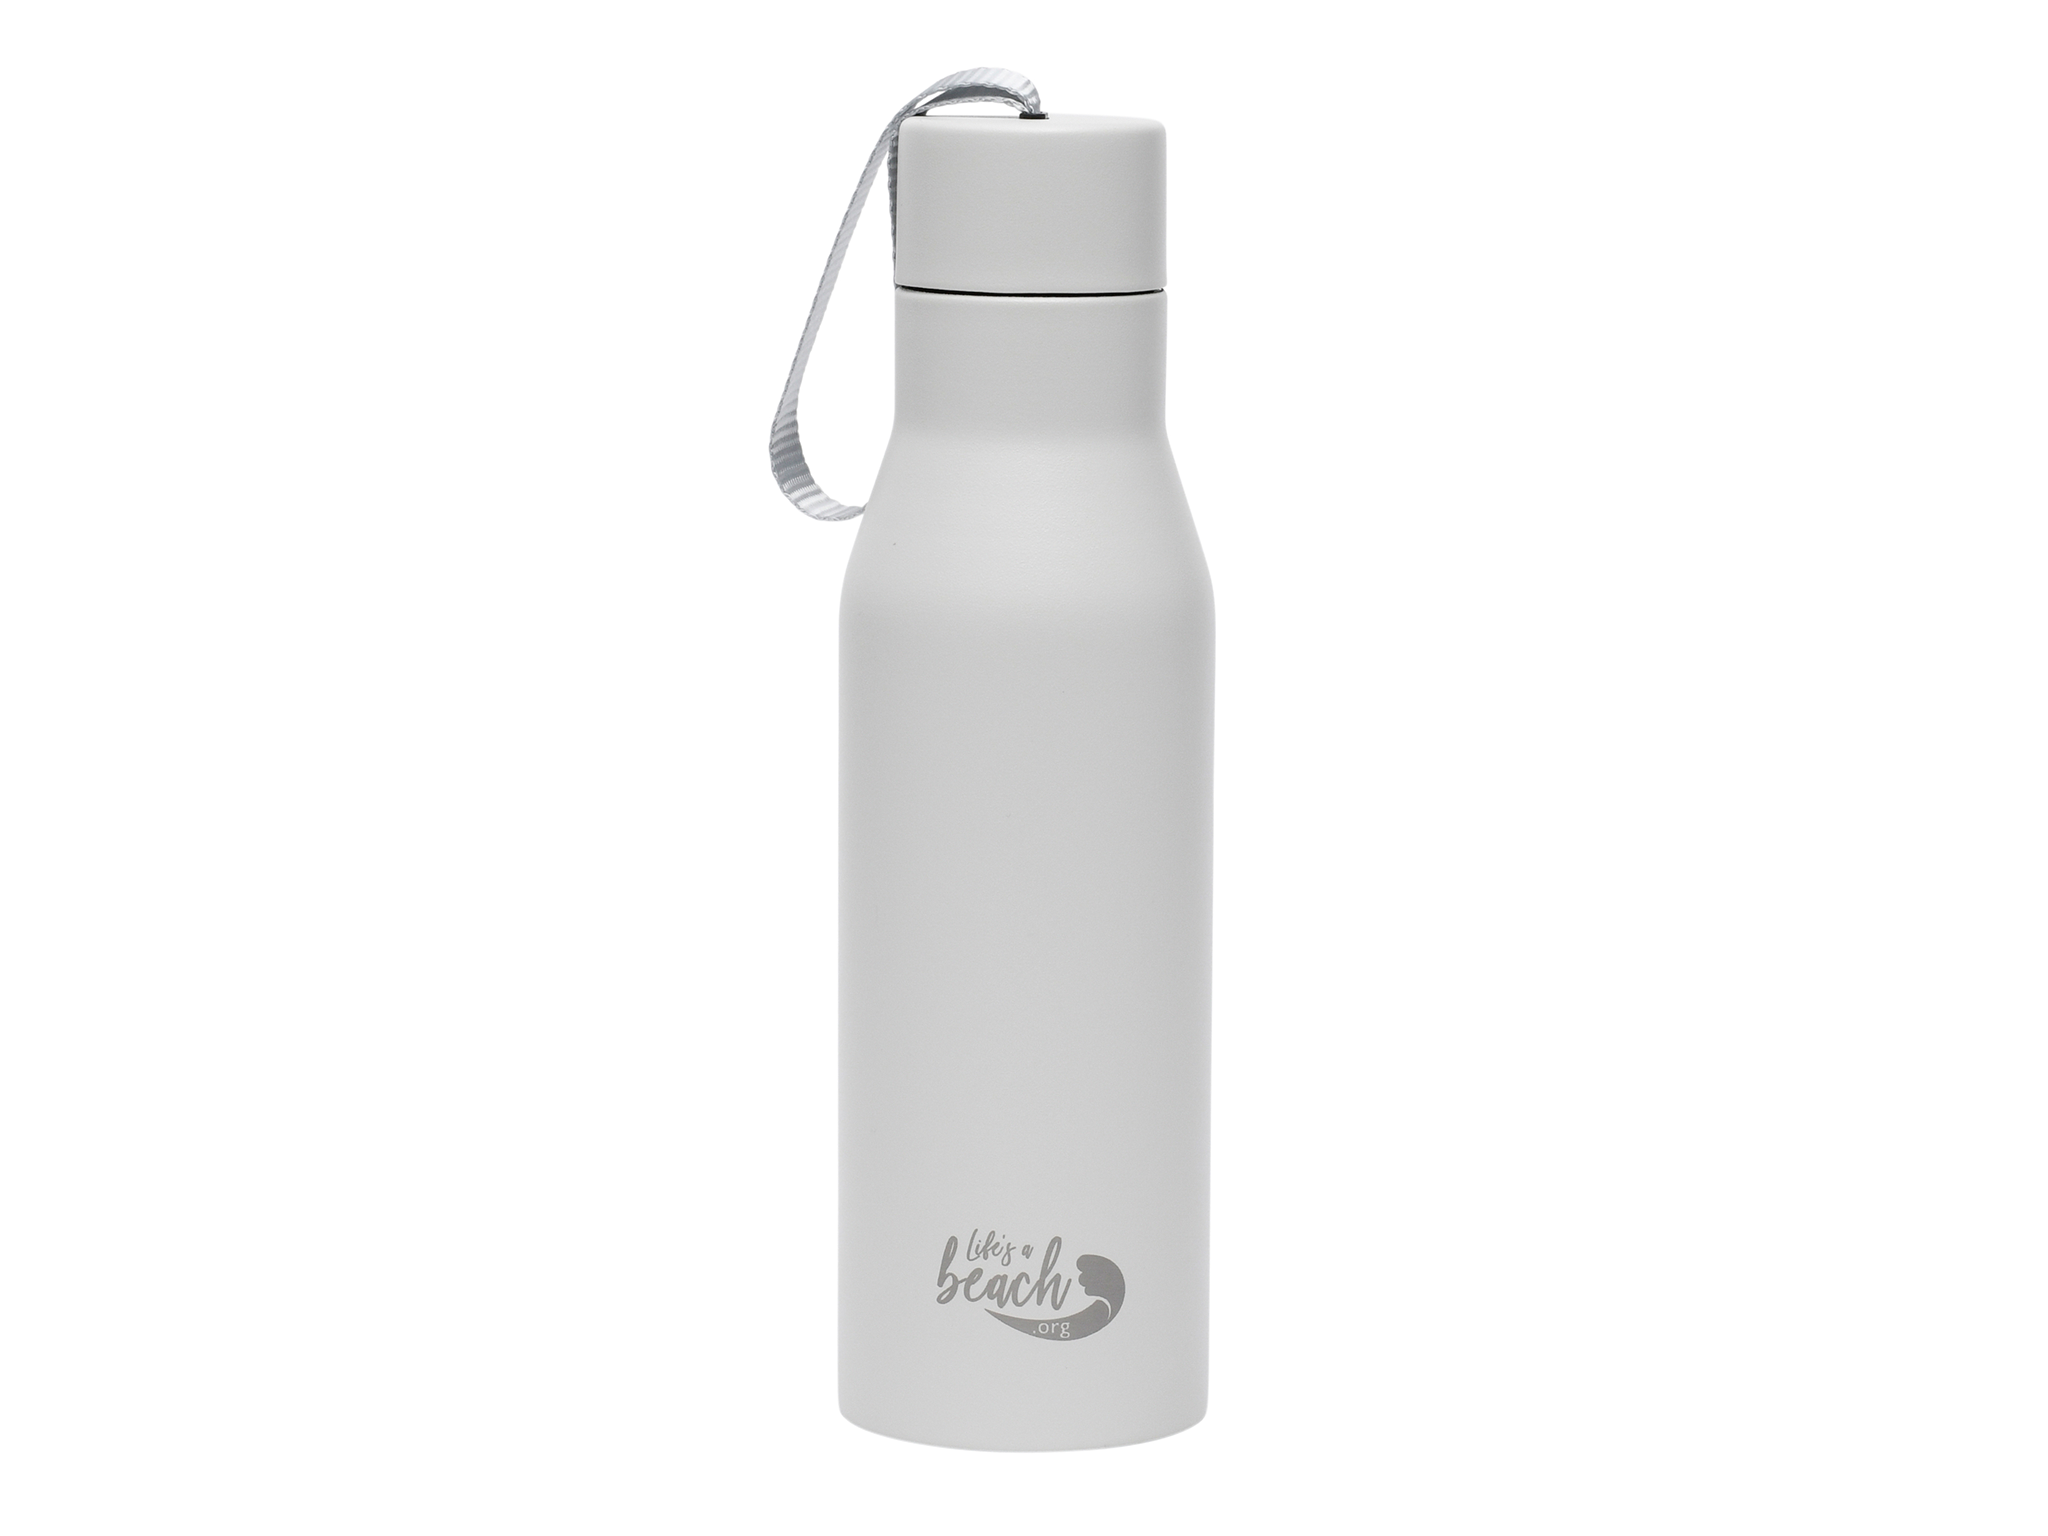 https://static.independent.co.uk/2023/04/24/17/ProCook%20lifes%20a%20beach%20stainless%20steel%20water%20bottle.png